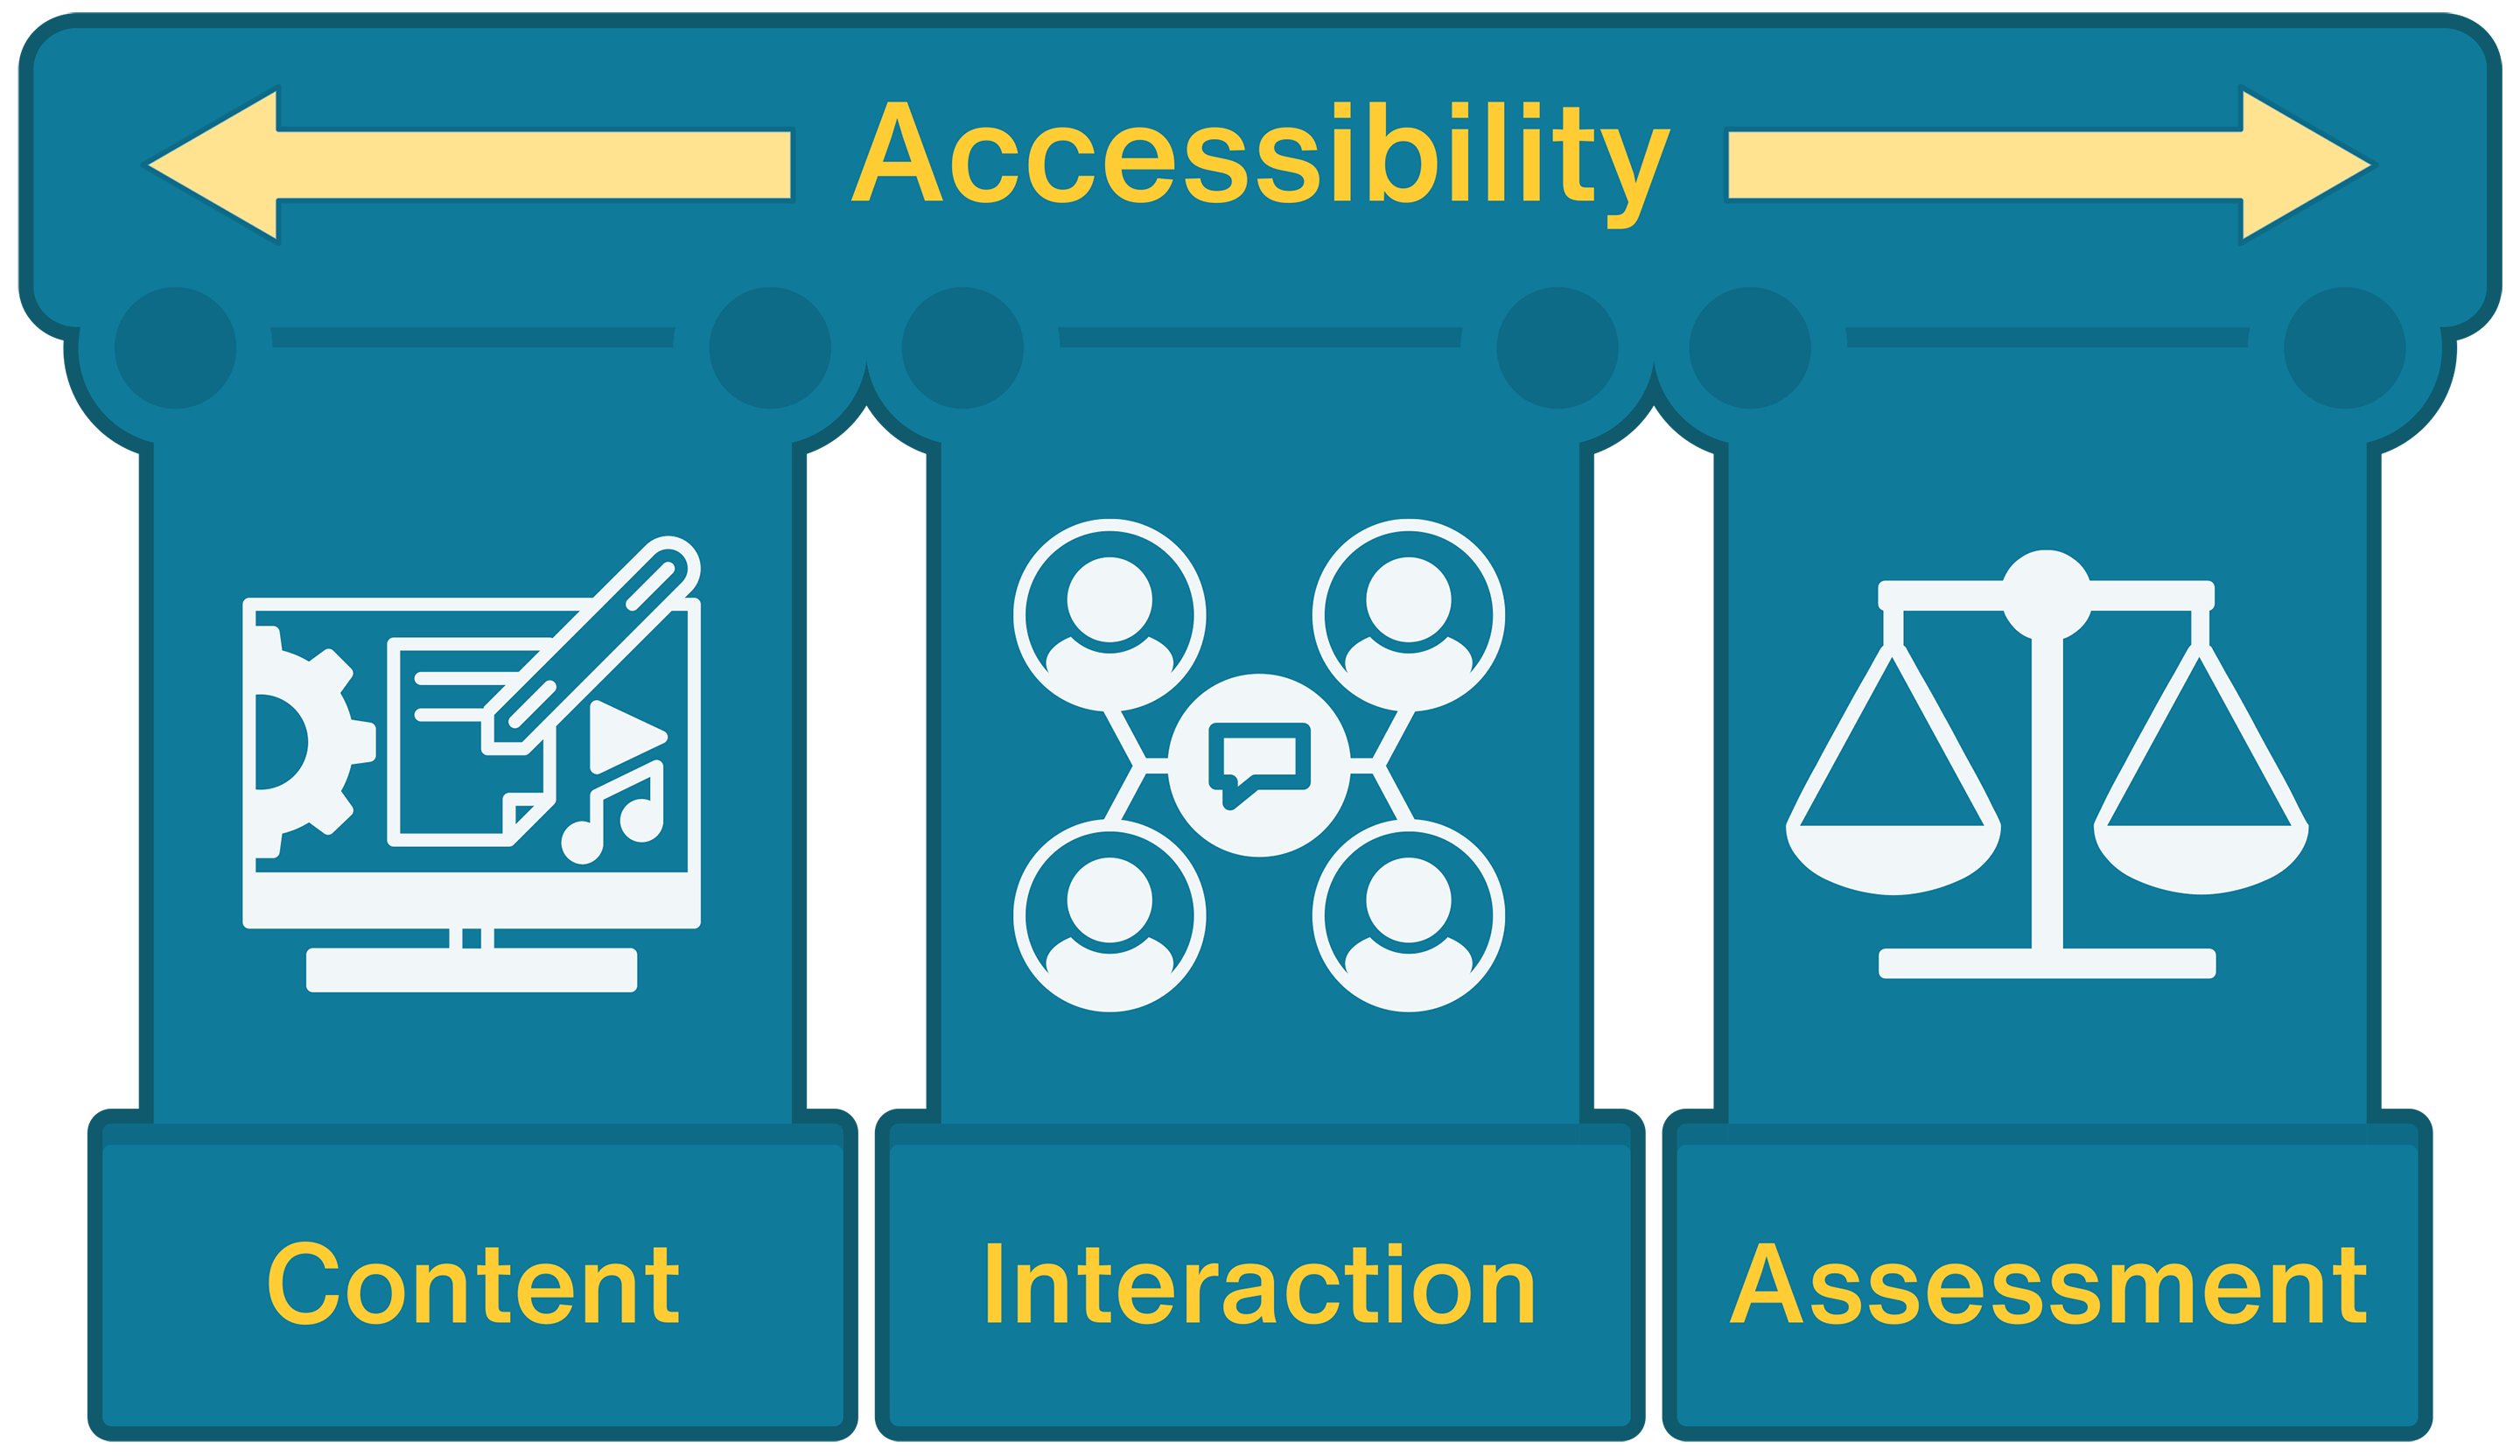 Accessibility should be enabled in course content, interaction, and assessment